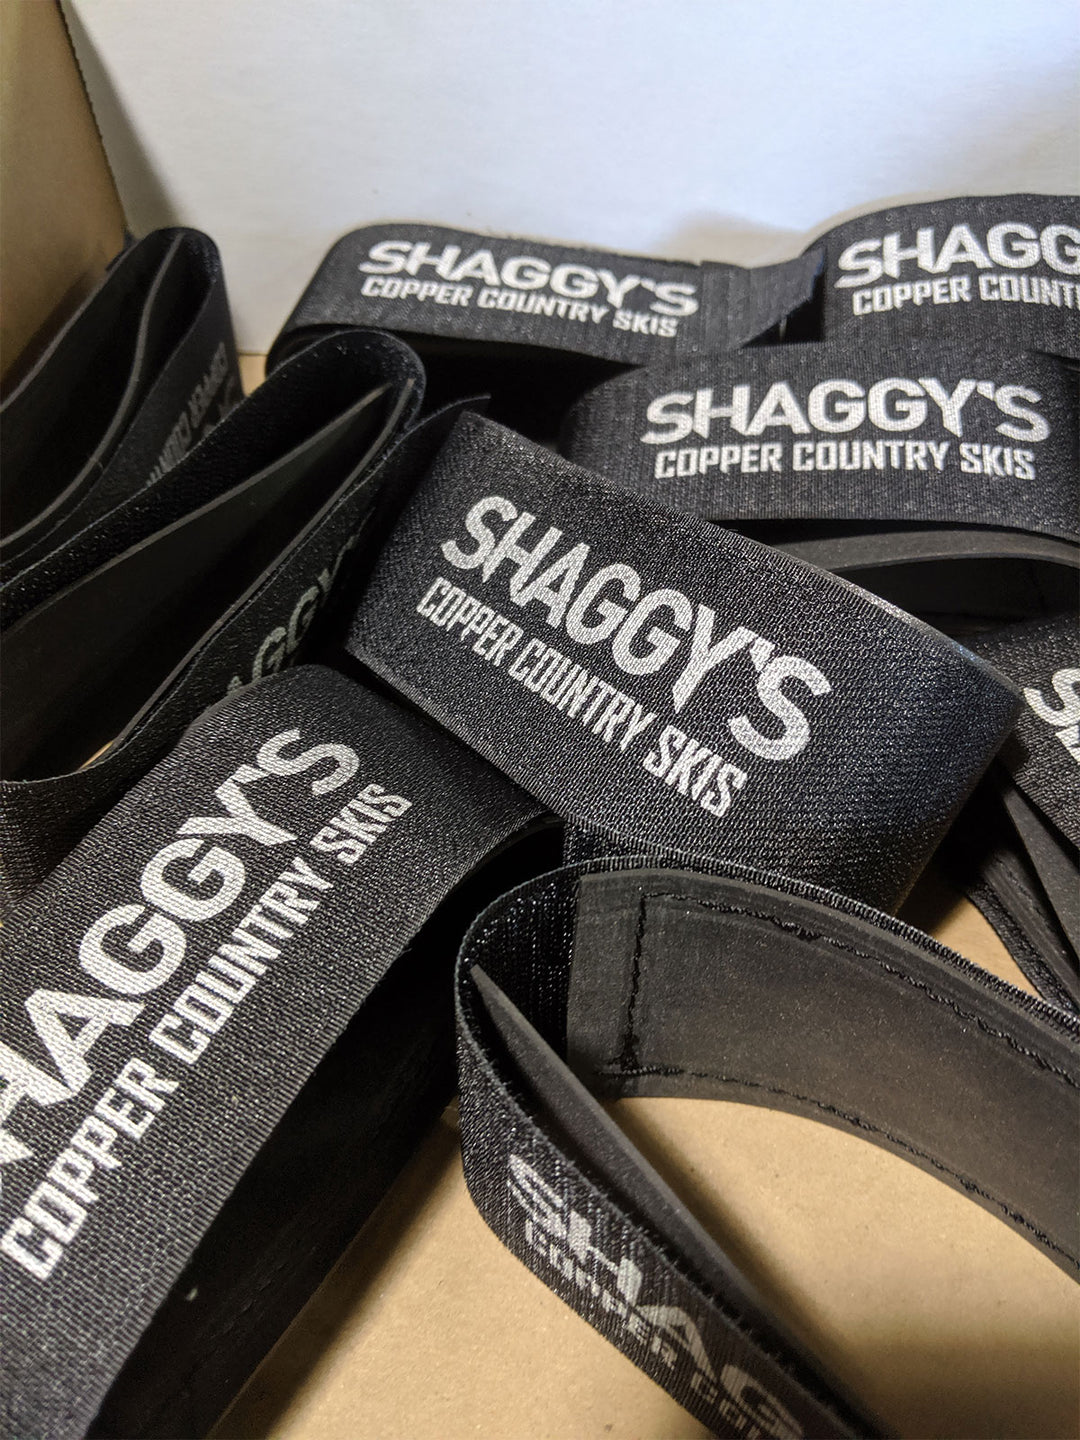 Shaggy's Ski Straps – Shaggy's Copper Country Skis